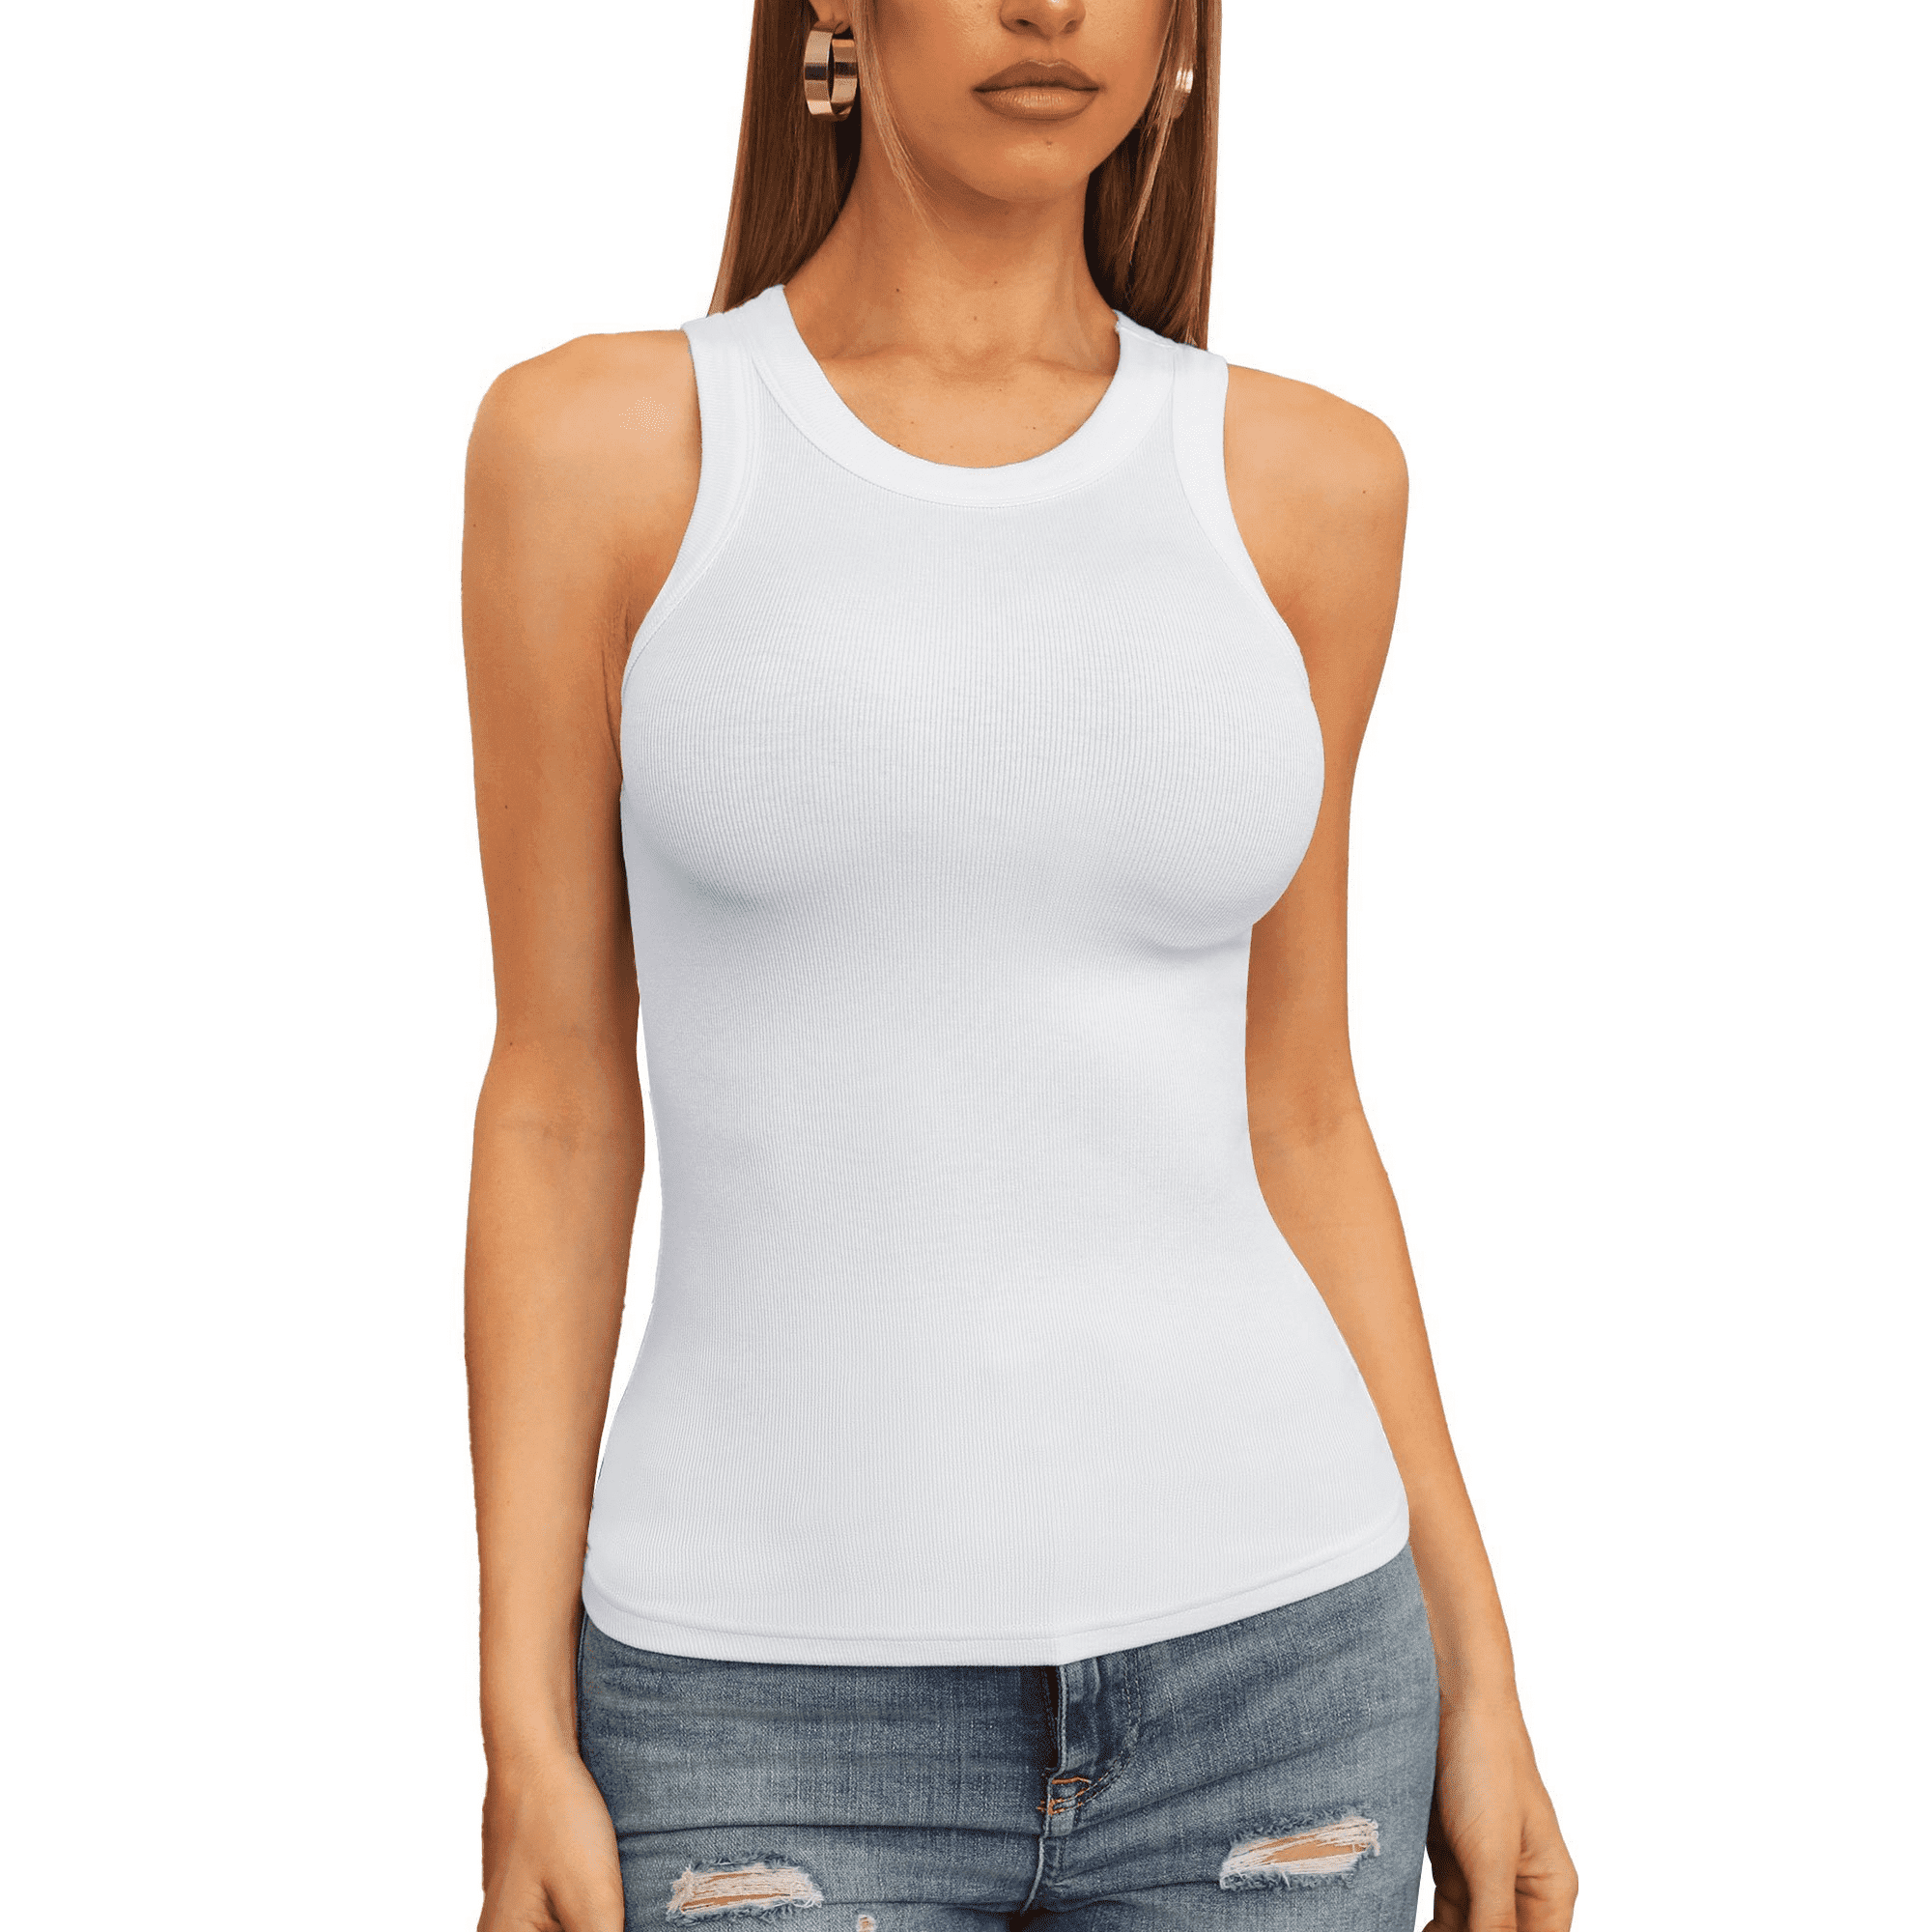 NKOOGH White Cami Tank Tops for Women Built In Bra Undershirt Top Women  Casual Summer Loose Sleeveless Round Neck Vest Tank Shirt Tunic Blouse Tops  Cami 